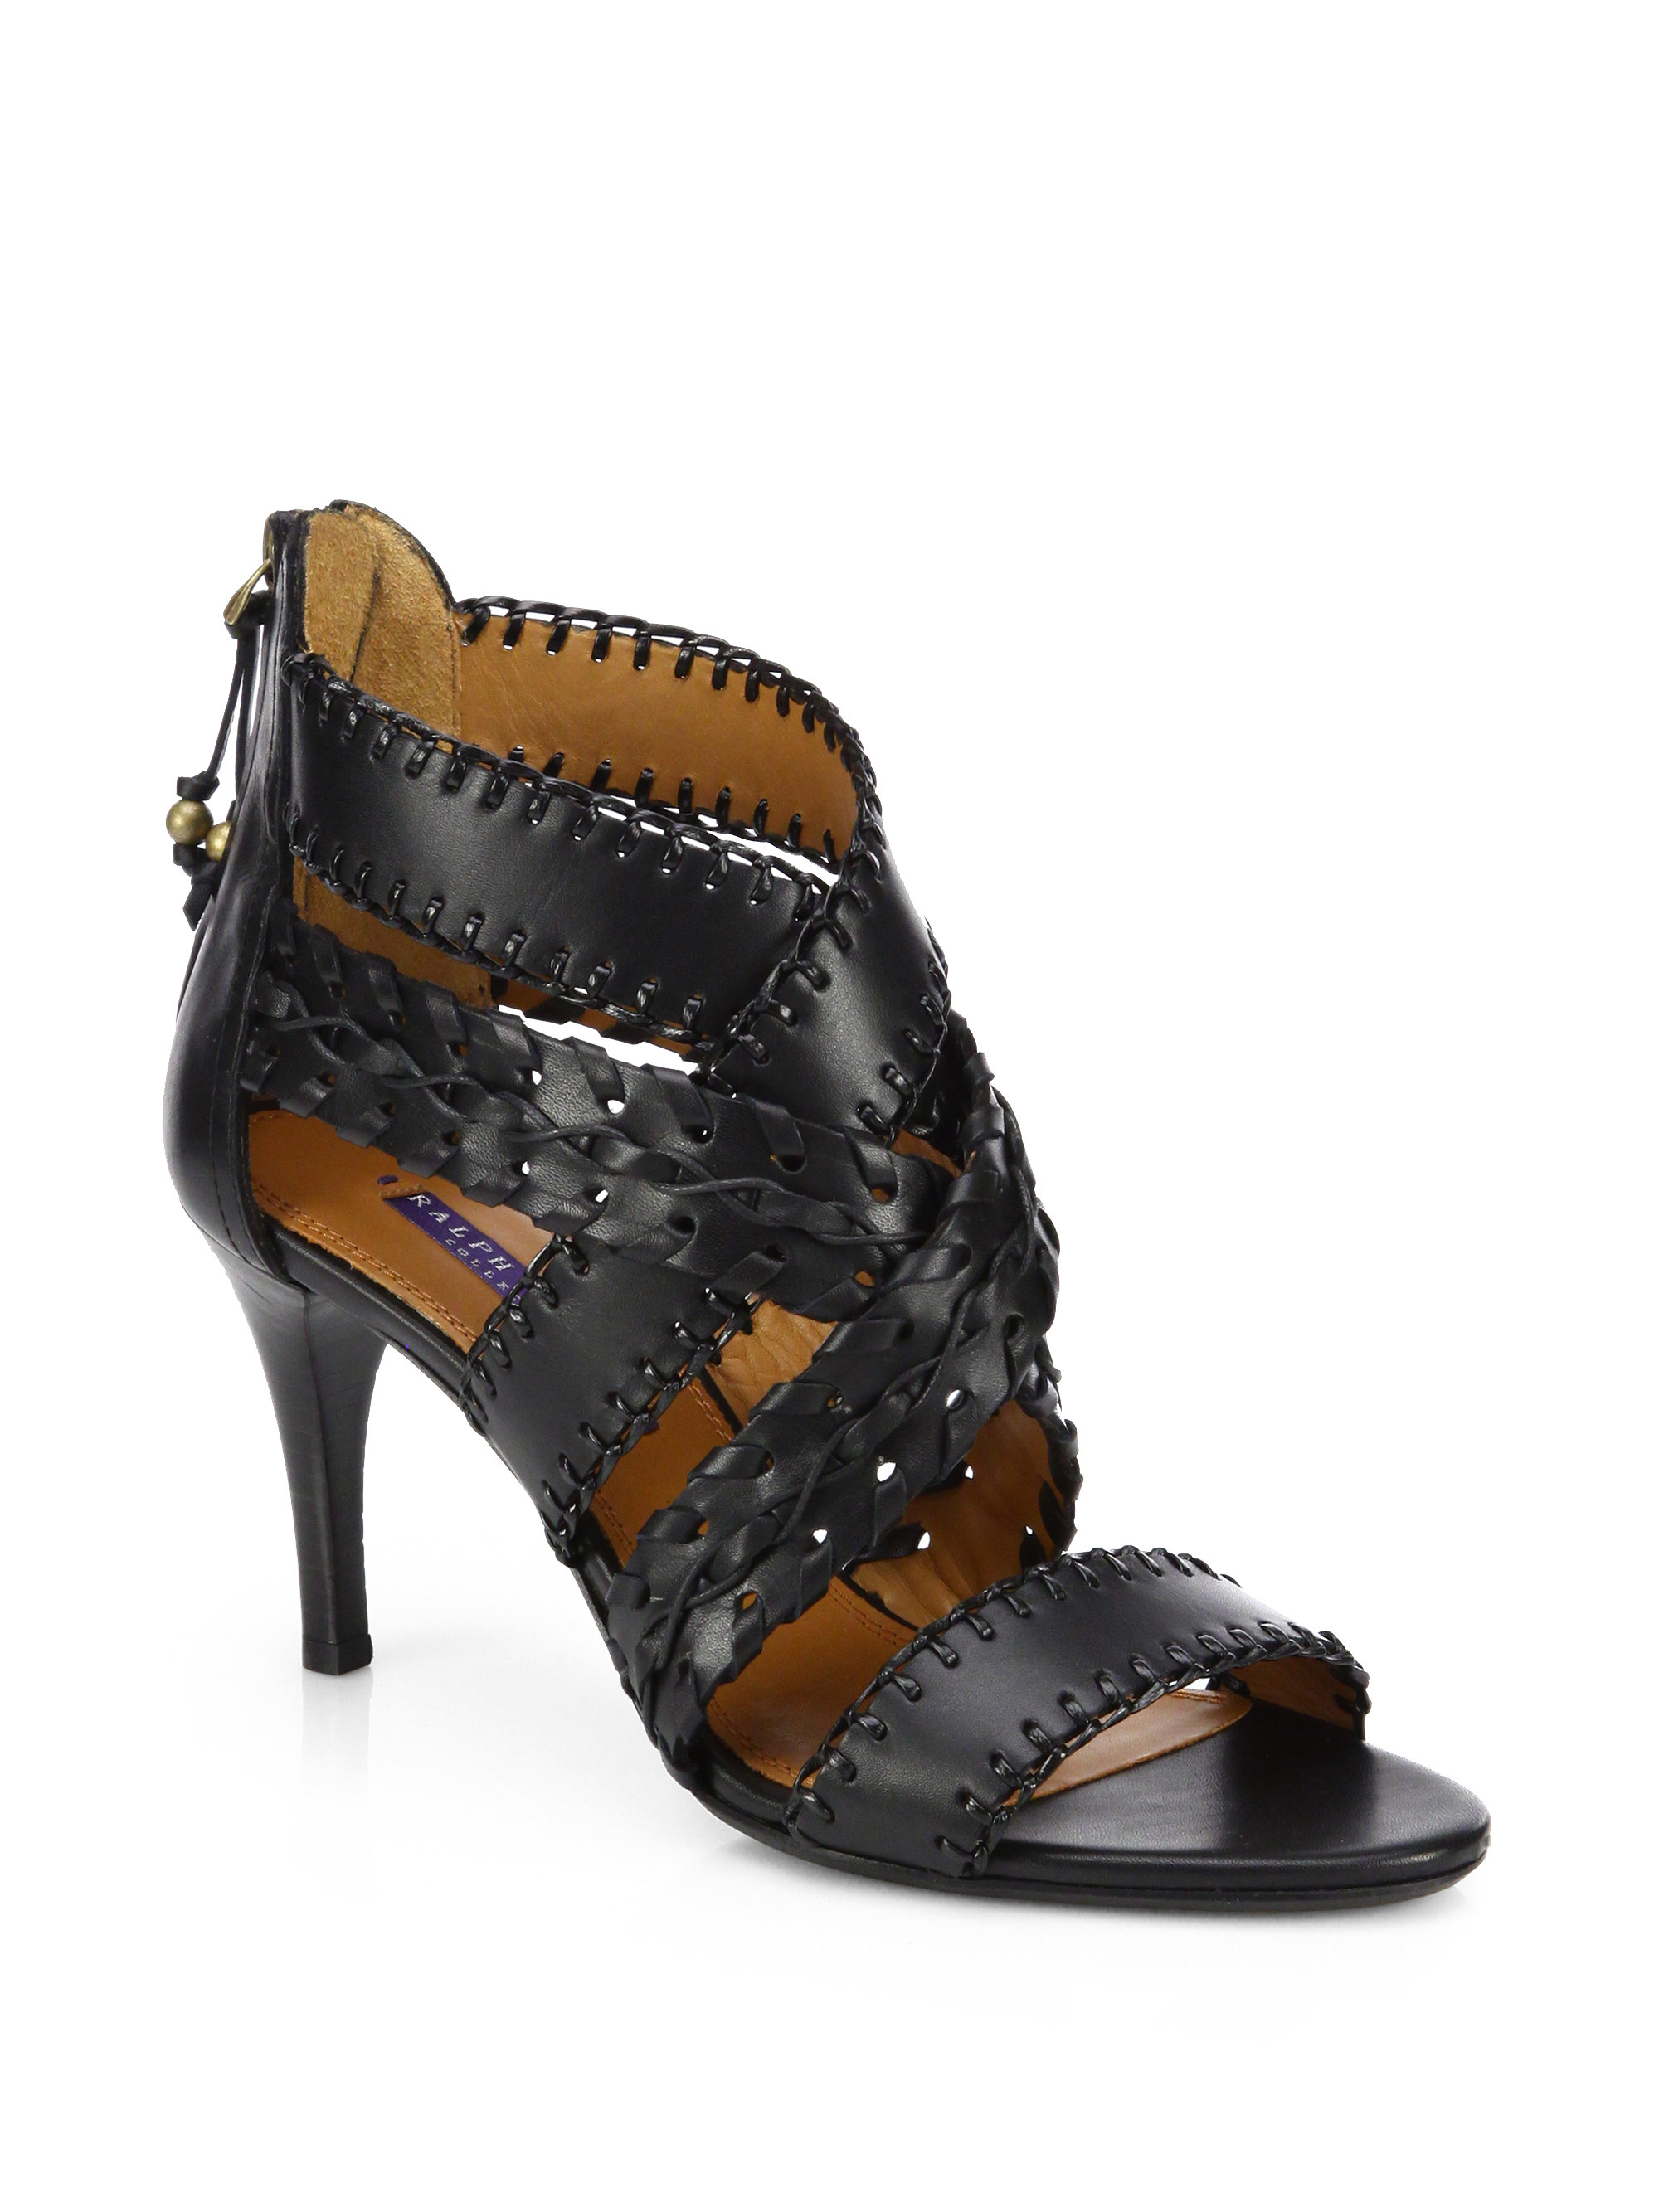 Ralph Lauren Collection Ardina Woven Leather Sandals in Black | Lyst